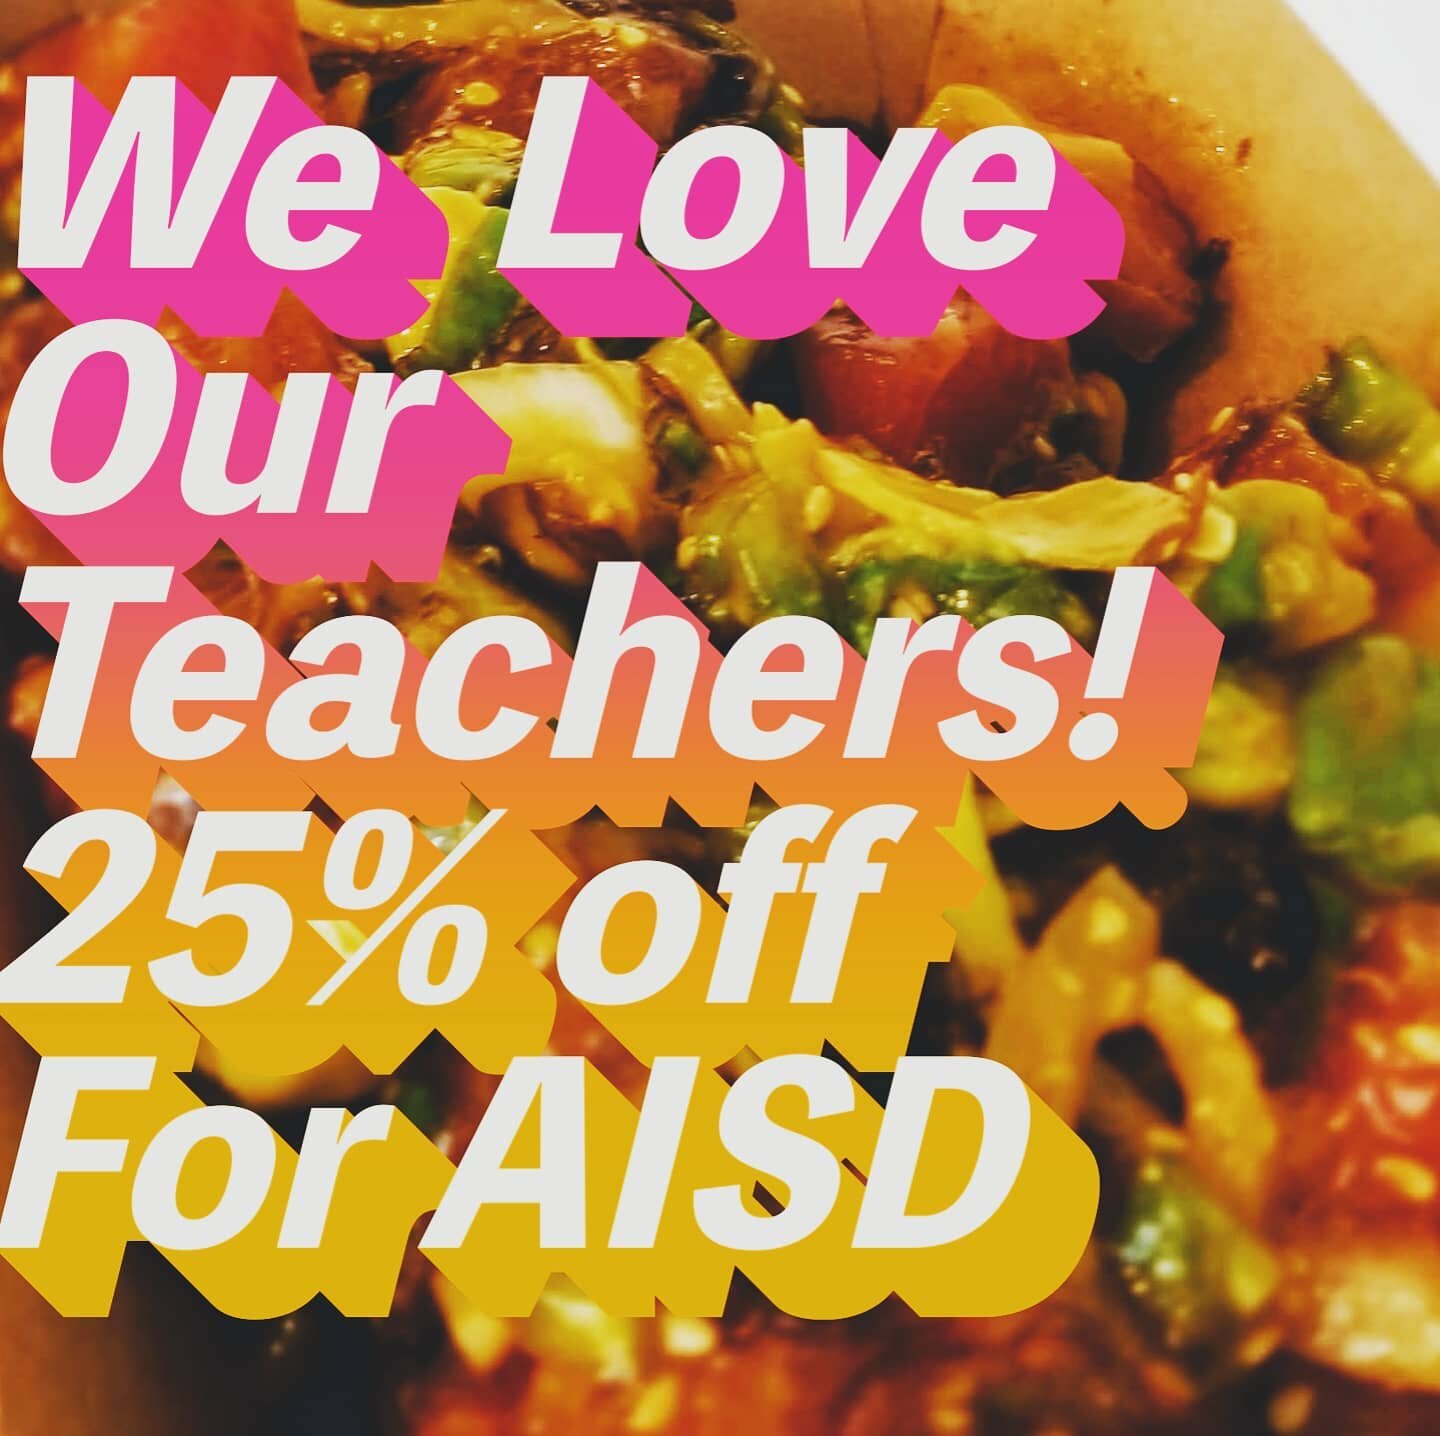 This week, we are super excited to honor the amazing teachers in AISD by offering 25% off their meals this week! 

Show.your AISD Credentials at the windo to receive this discount (must order in person to receive this offer!)

Personally, we have a l